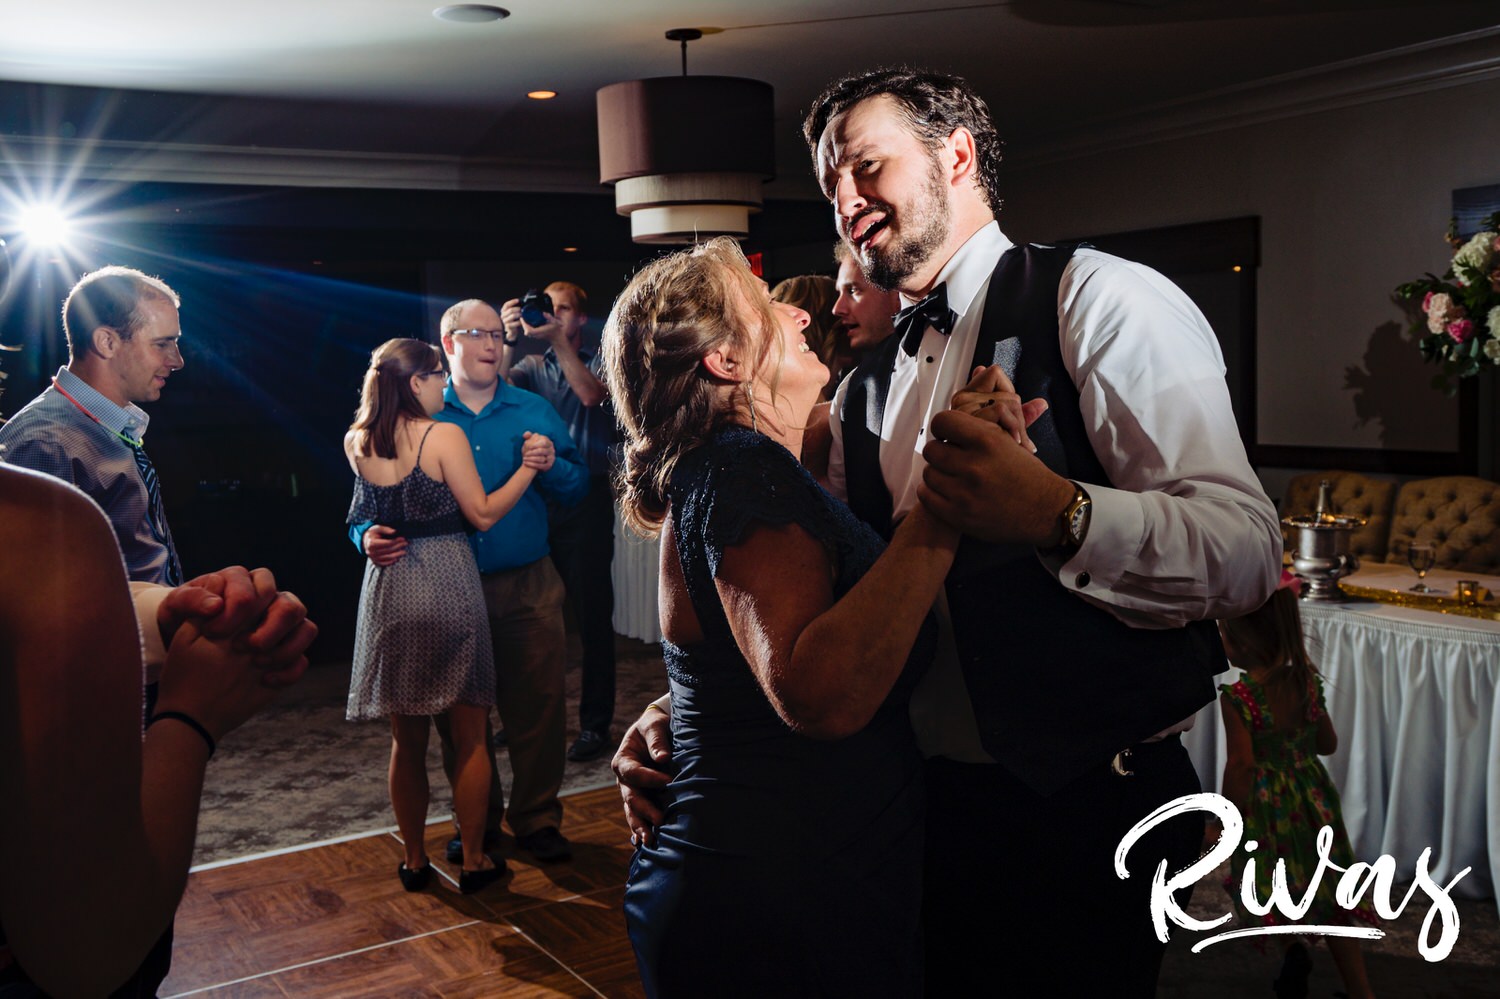 A candid picture of a groom's mom dancing with his brother during a wedding reception at Lawrence Country Club in August. 